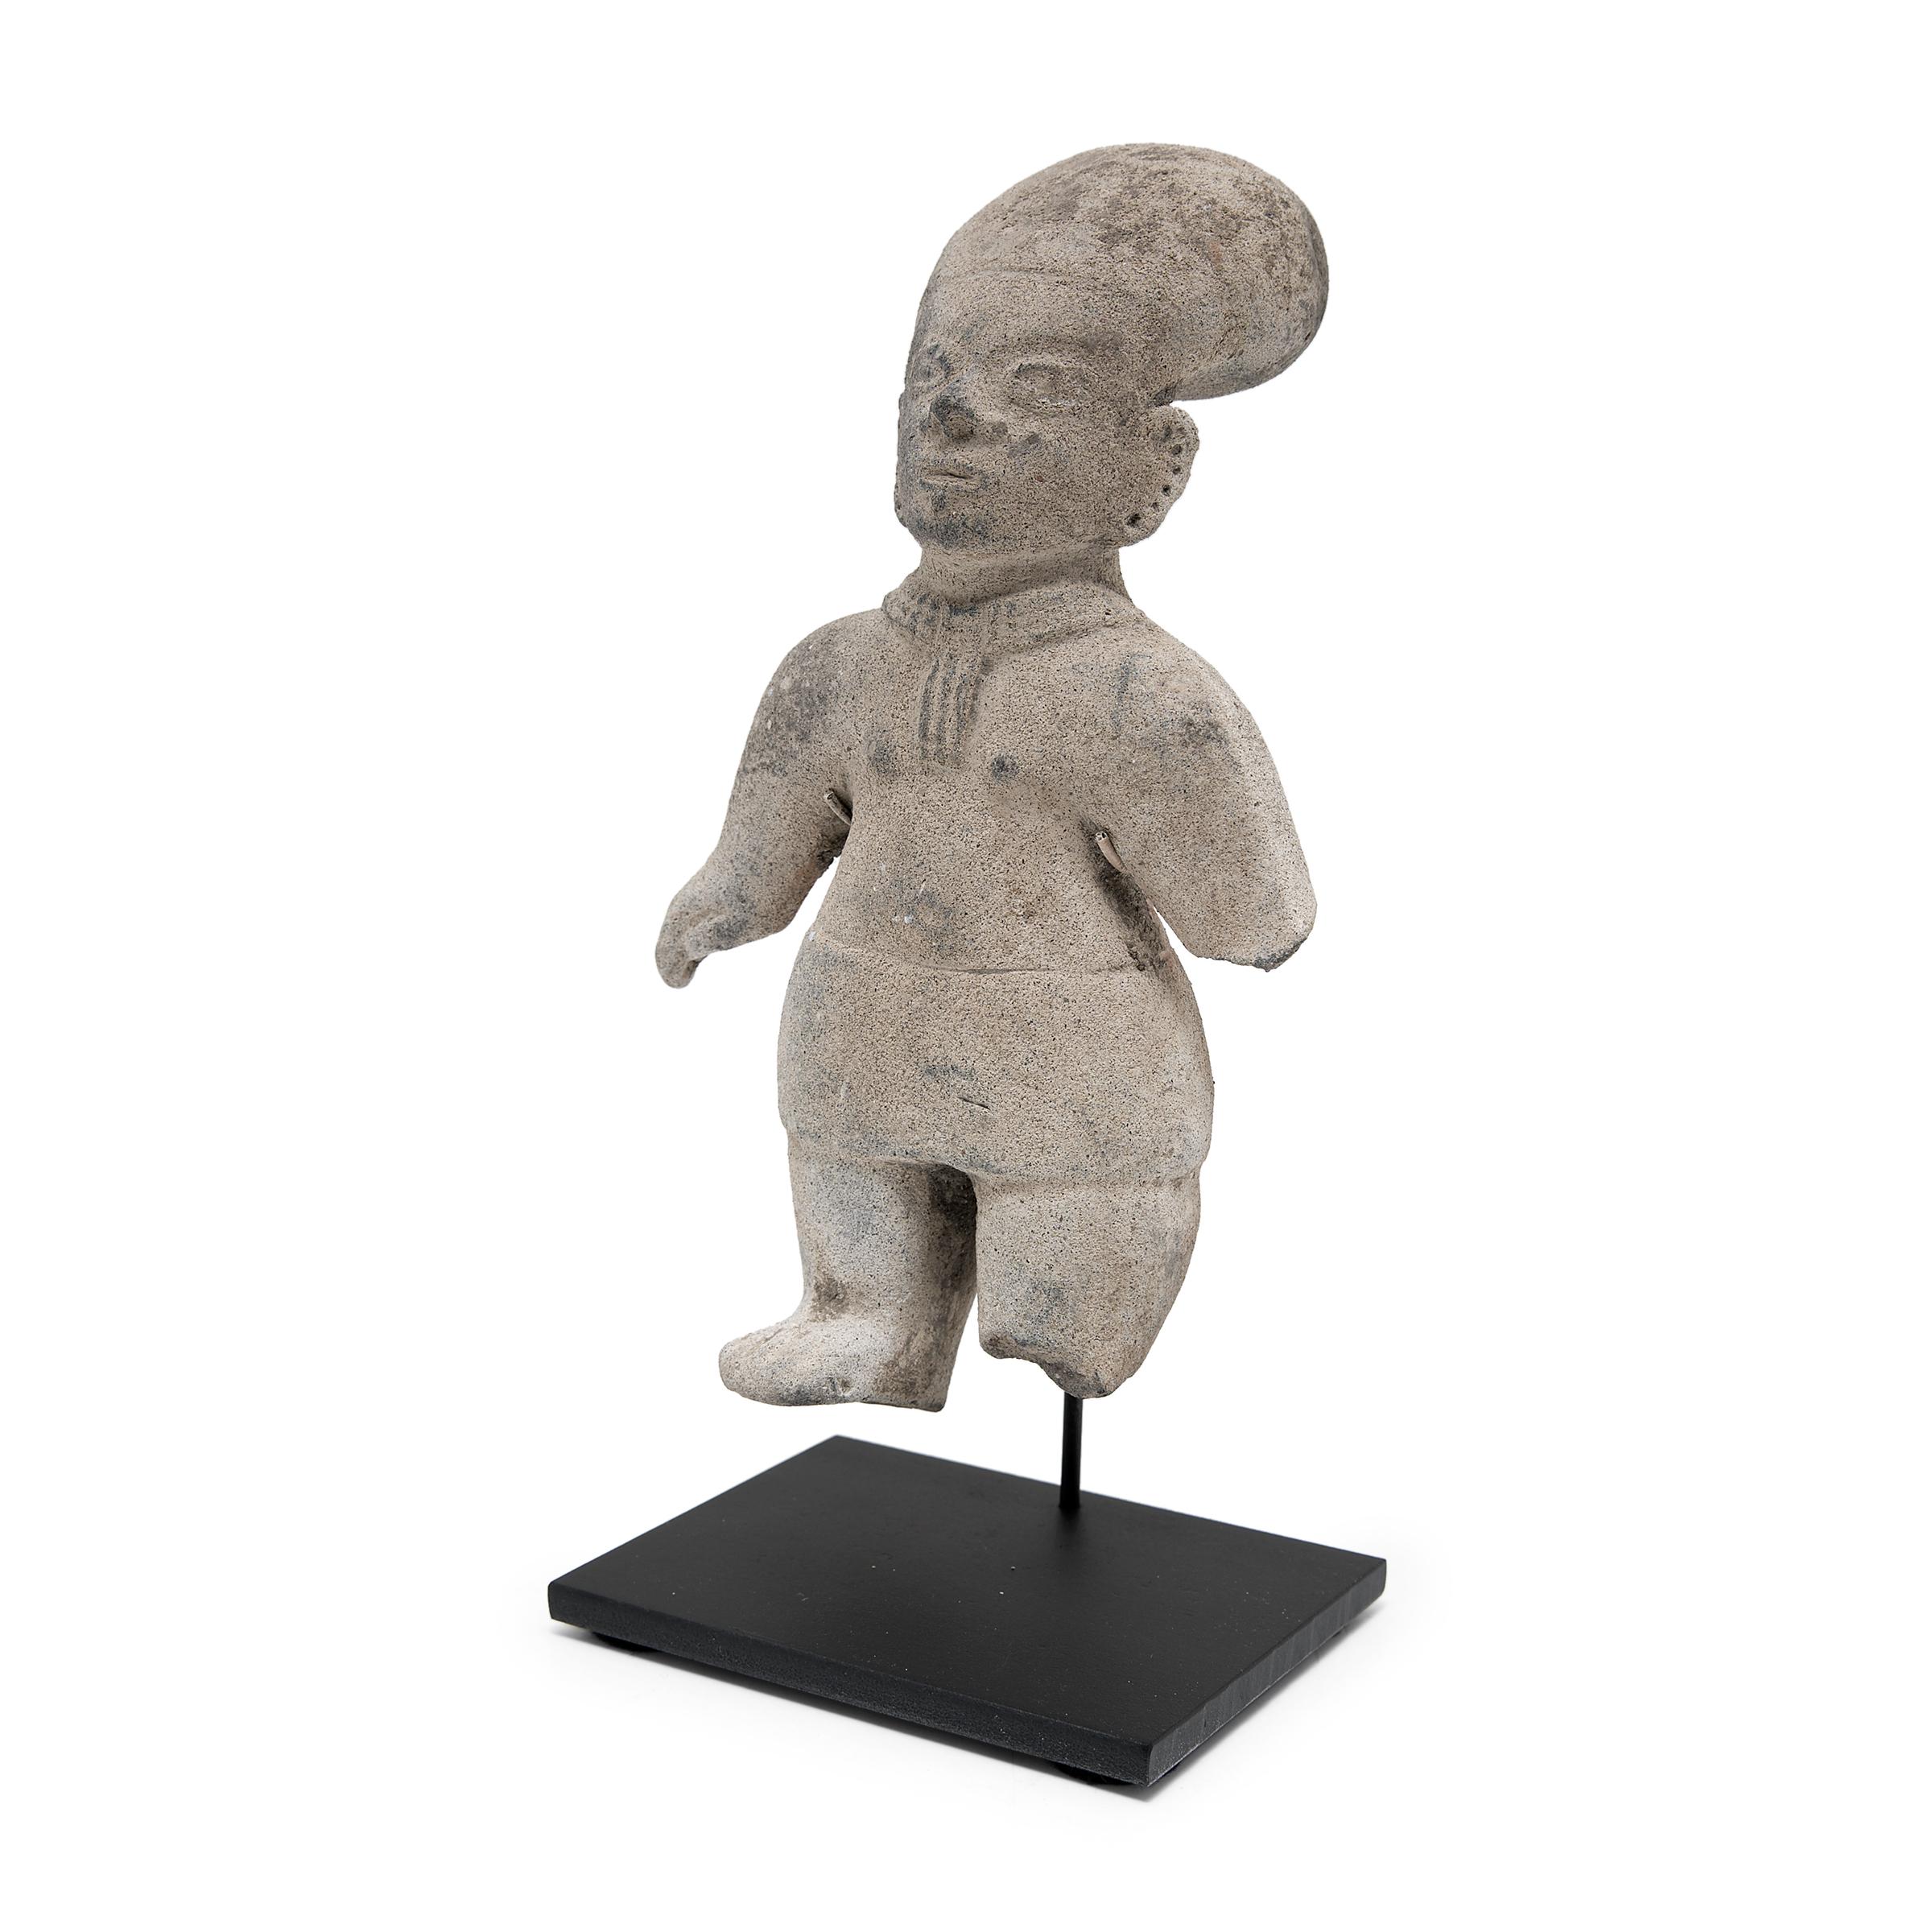 This standing effigy was crafted in 500 A.D. - 1000 A.D. Mesoamerica using the gray clay paste that characterizes La Tolita-Tumaco ceramics of early Colombia-Ecuador. The art of La Tolita-Tumaco civilization is considered one of the most developed